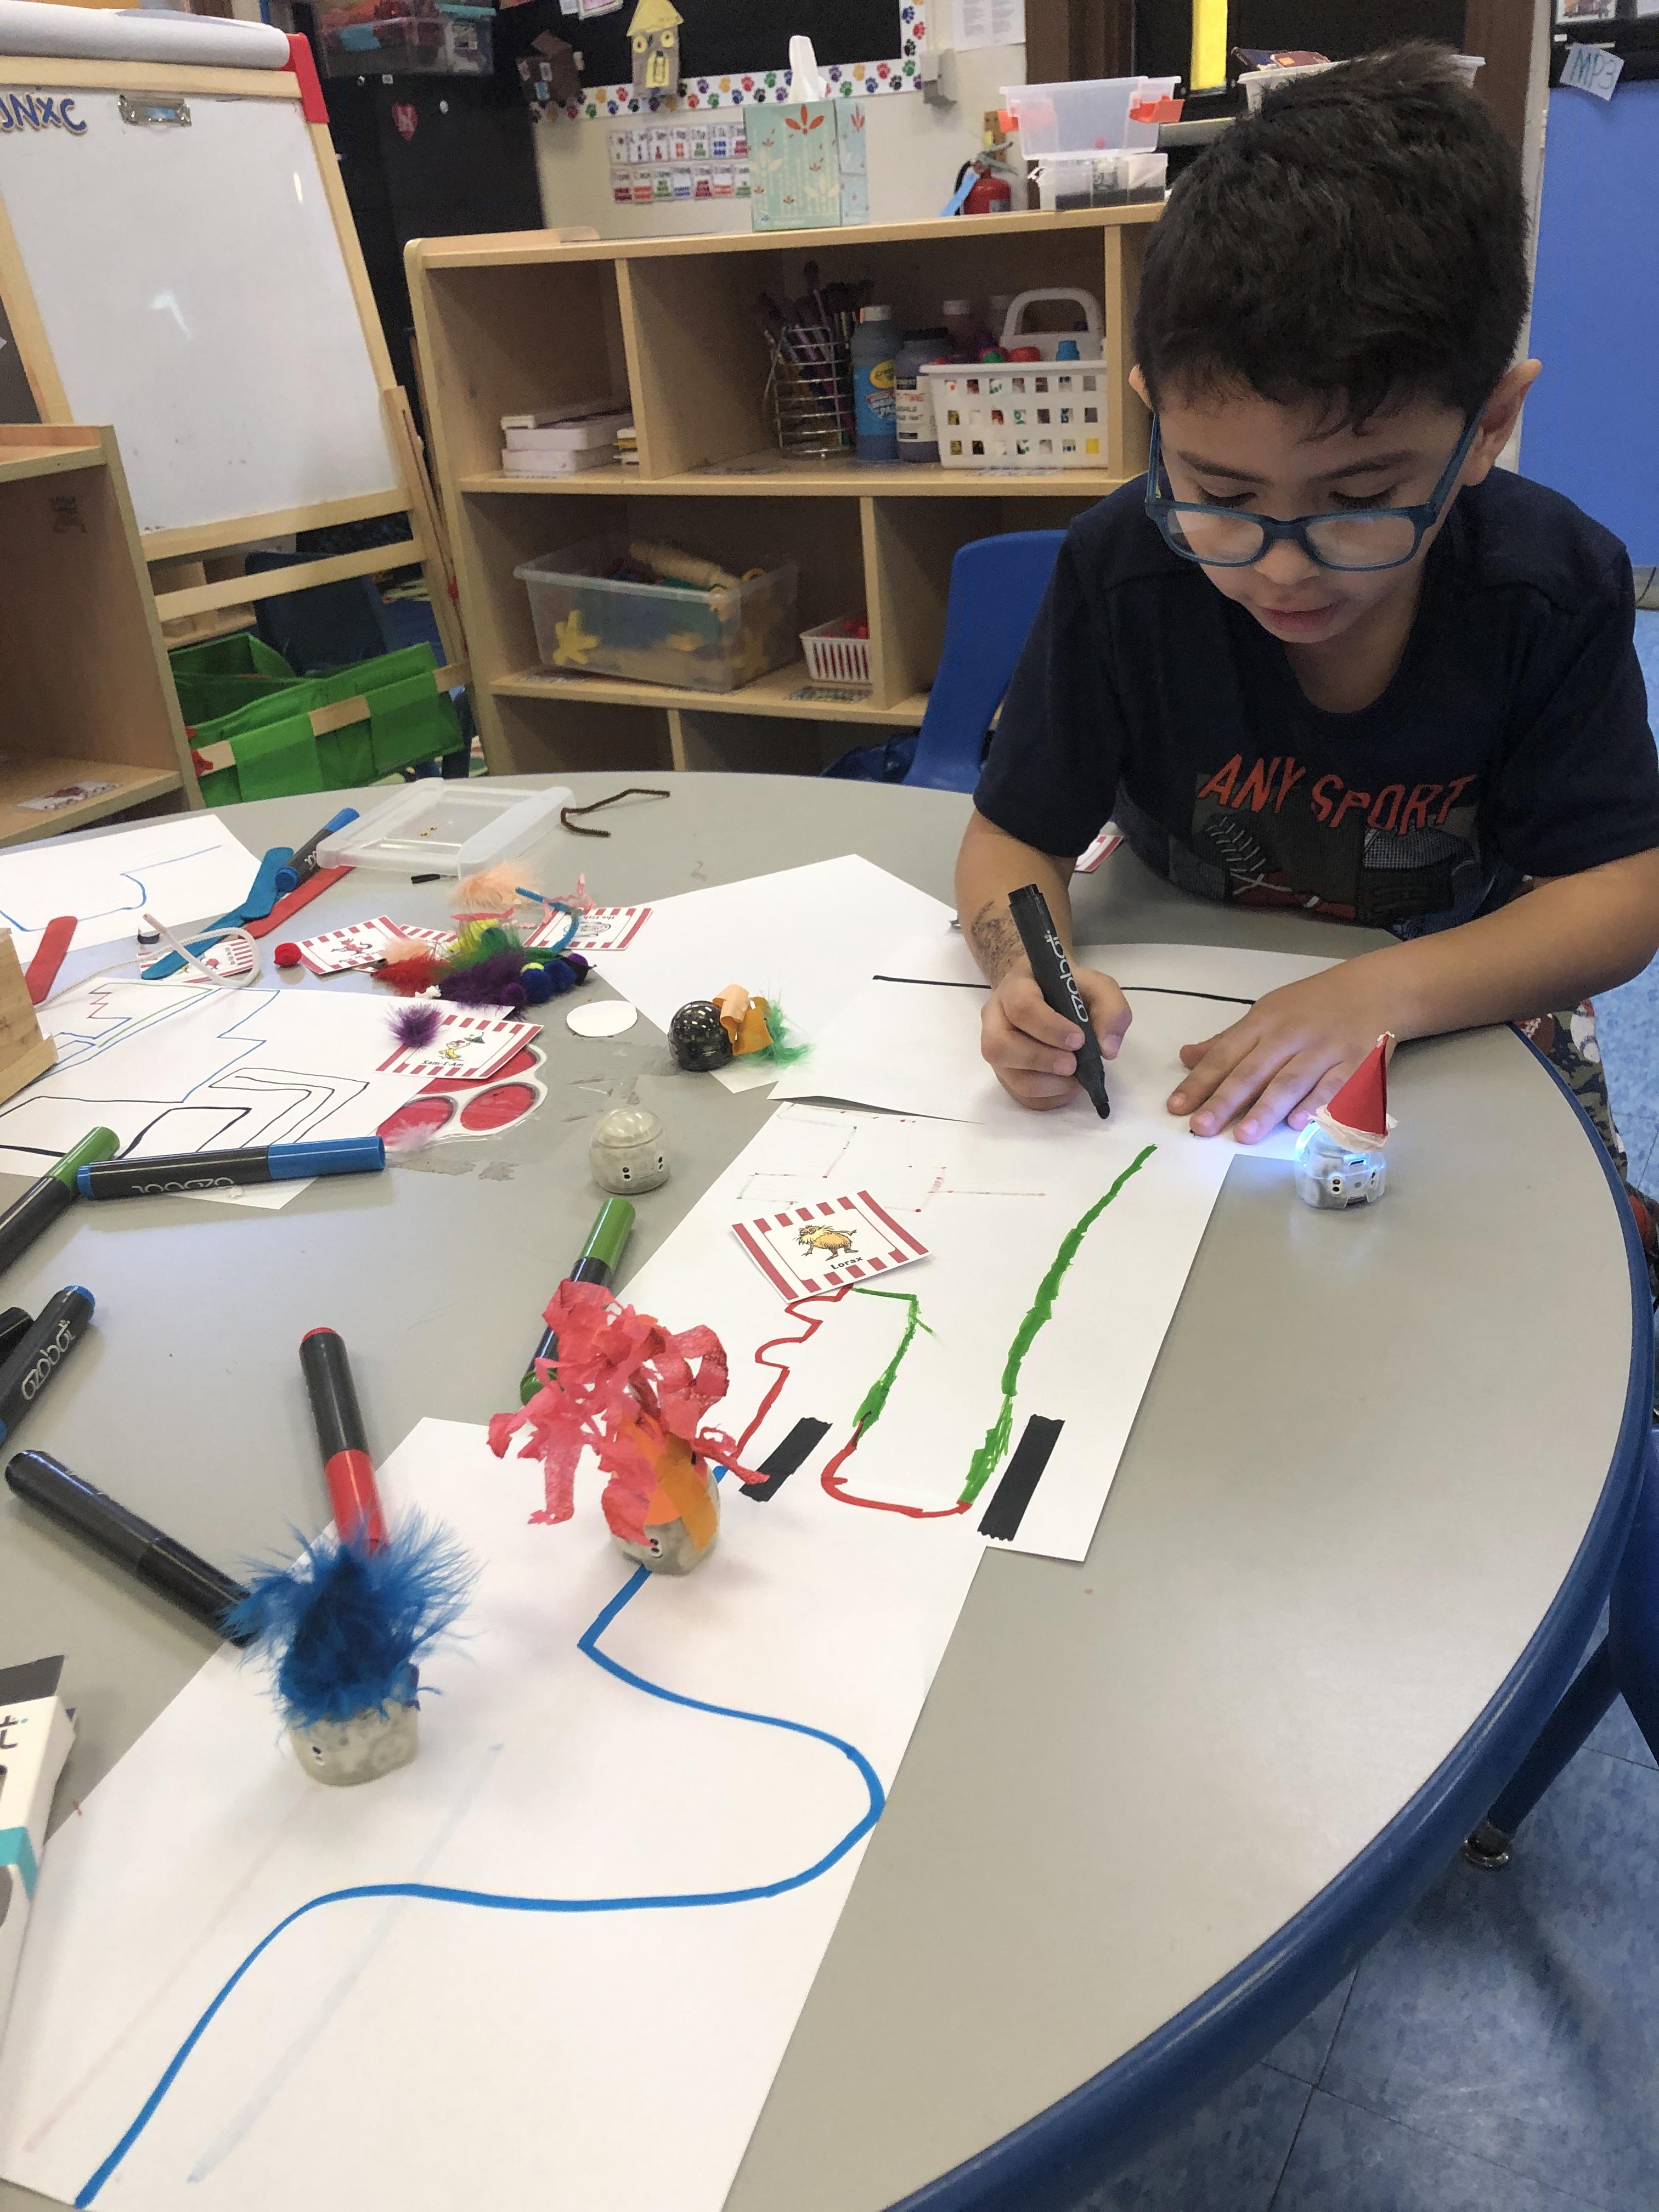 boy with glasses making corrections to the ozobot path he created